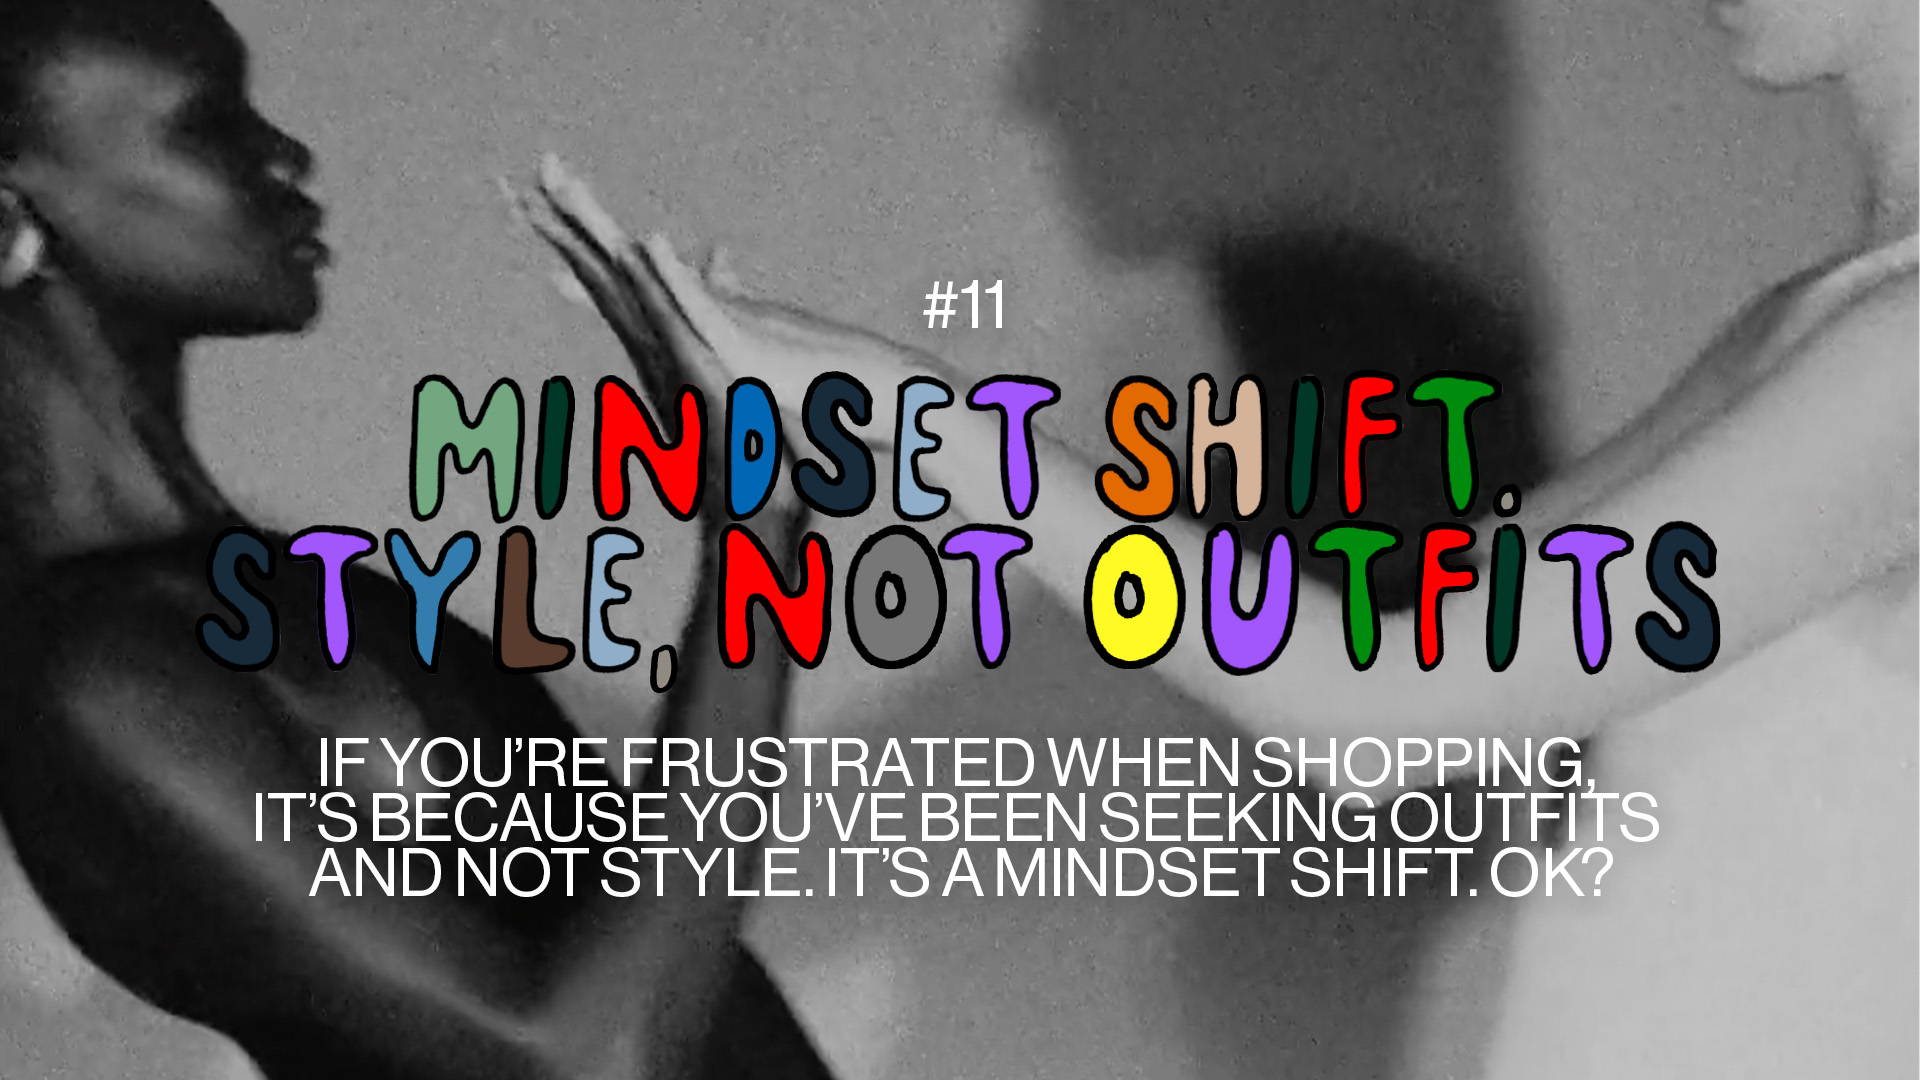 Mindset Shift, Style not outfits, Good Ick #11